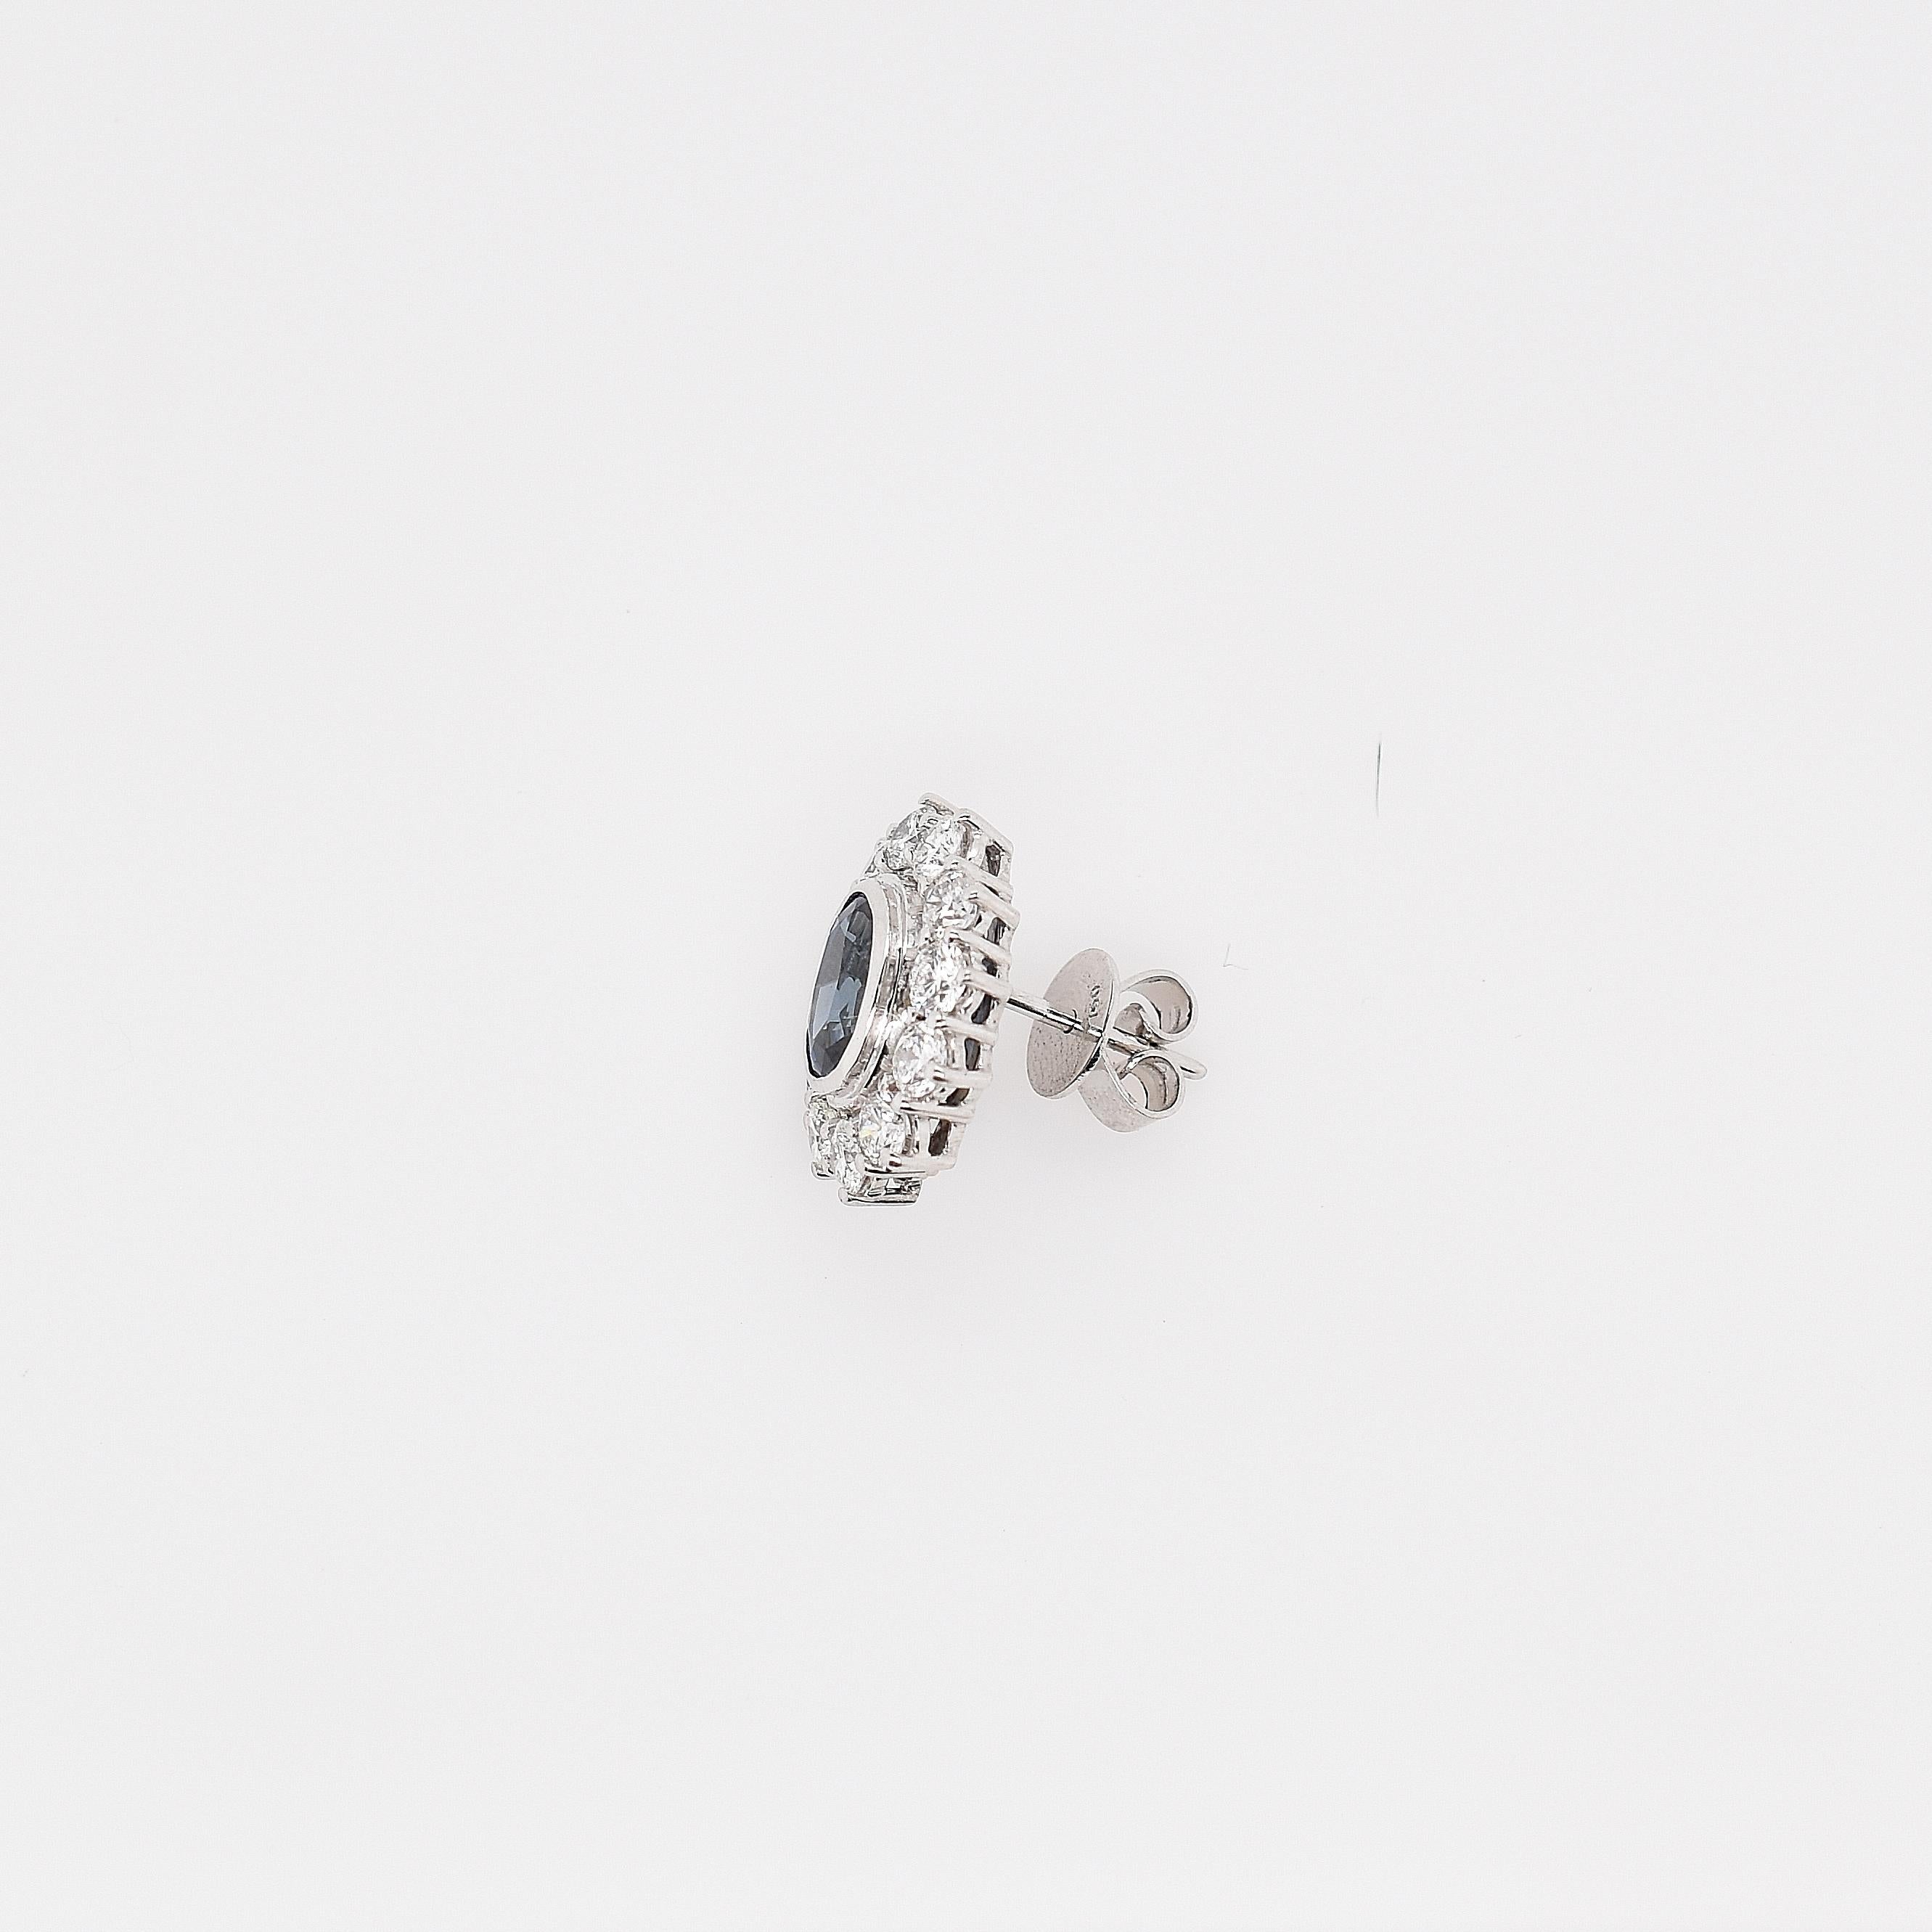 Contemporary 18 Carat White Gold Oval Ceylon Sapphire and Diamond Cluster Stud Earrings